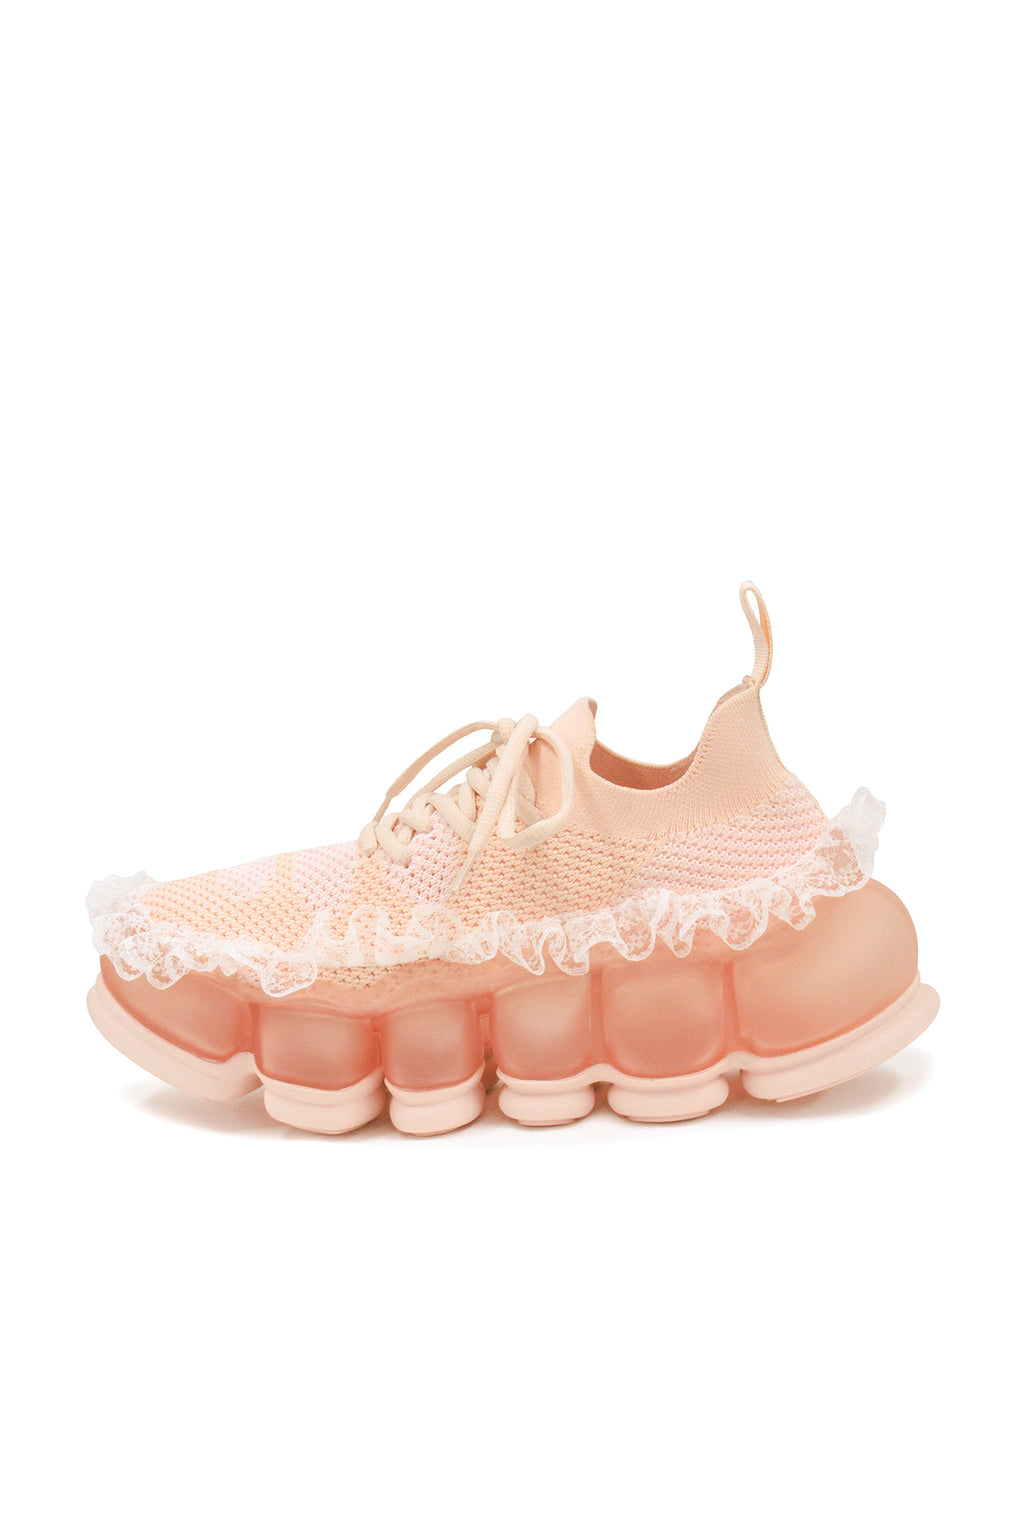 New “Jewelry” Shoes lace / Nude Pink